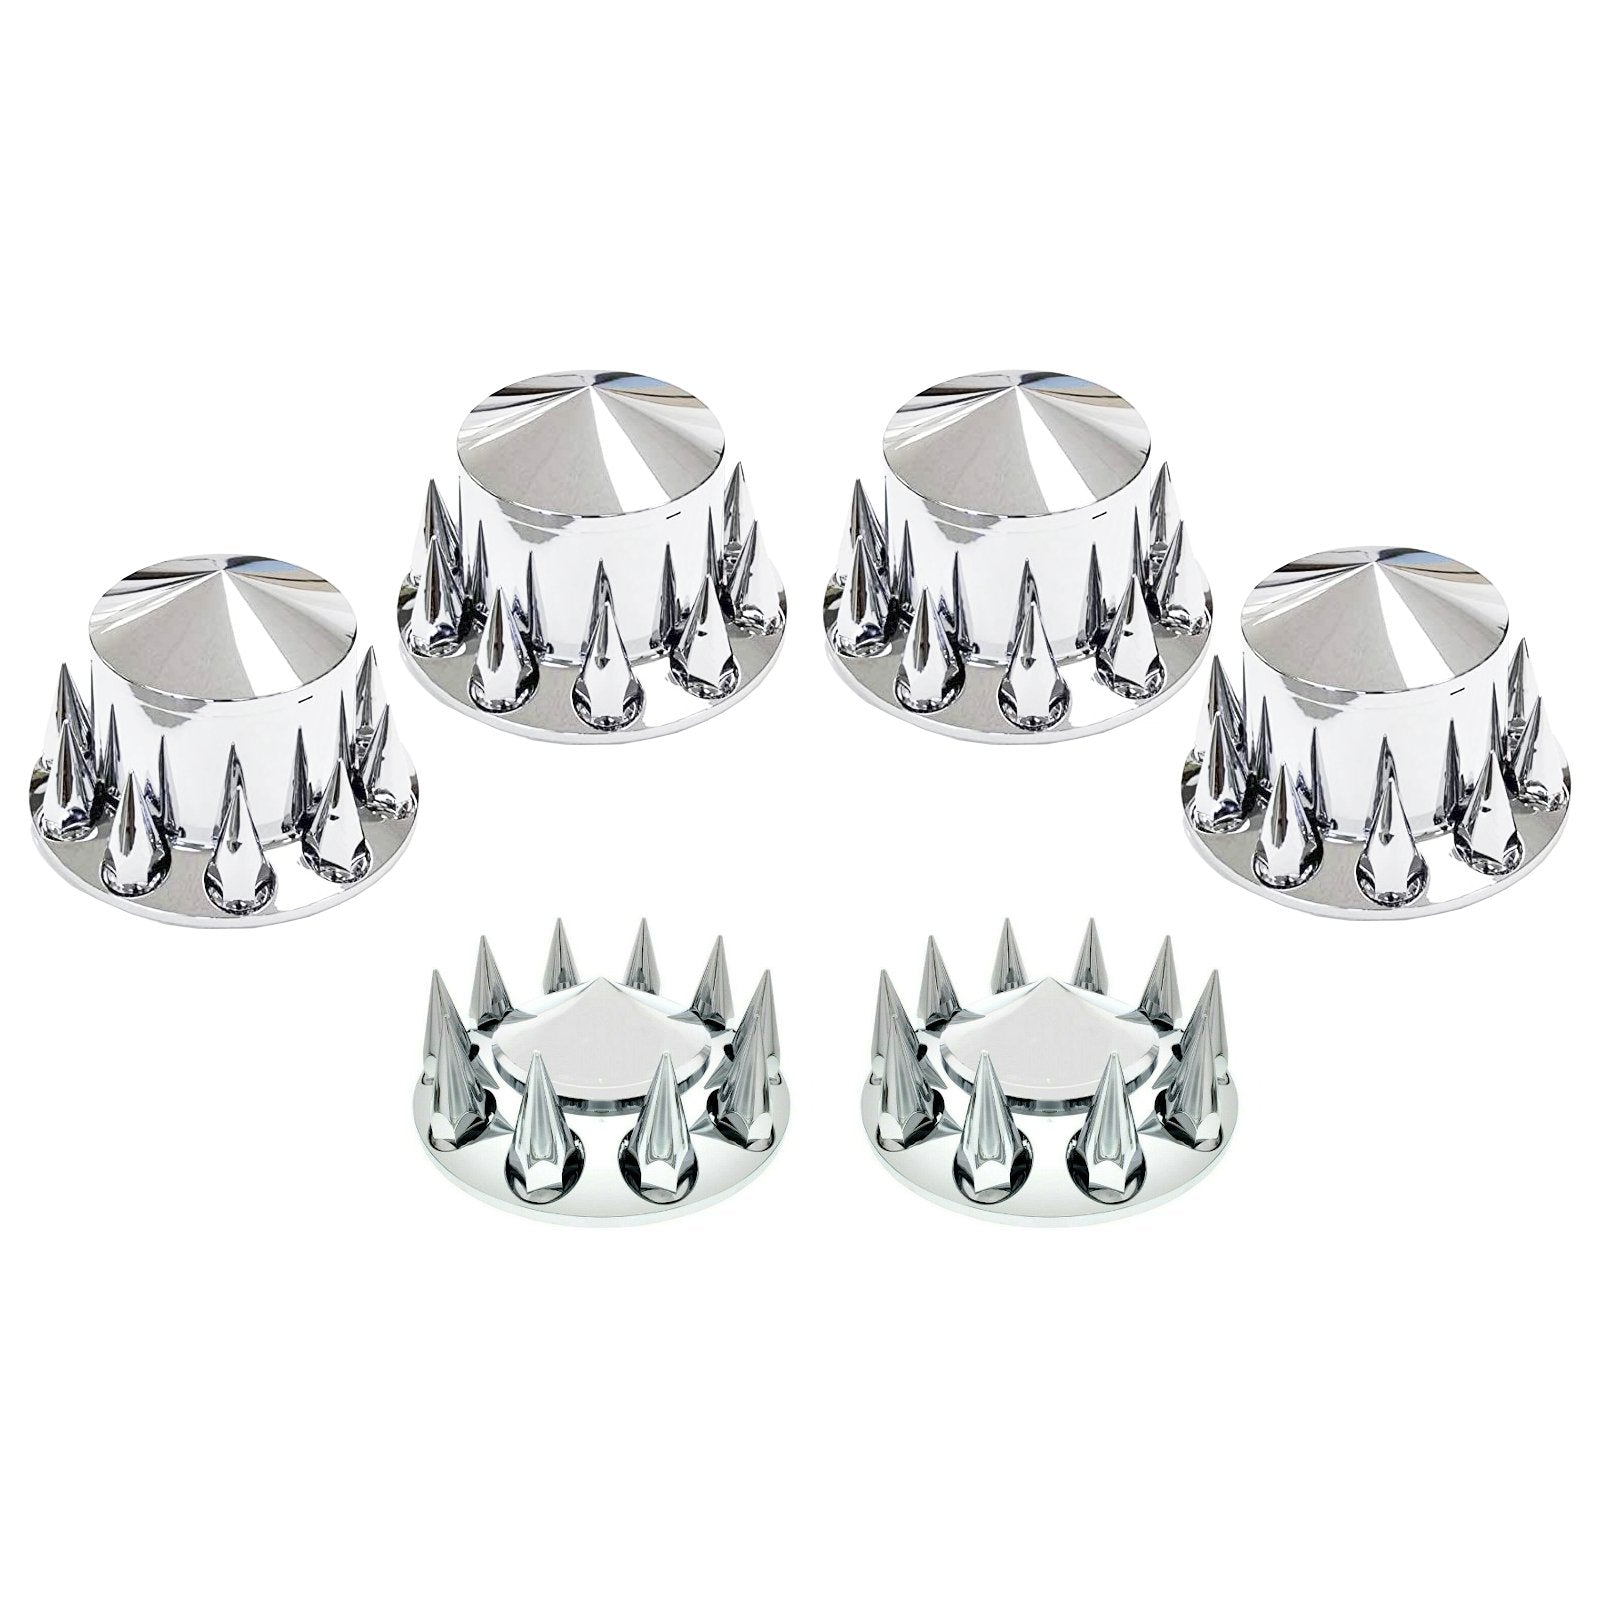 Complete Chrome Pointed Axle Cover Kit with Spiked Lug Nut Covers